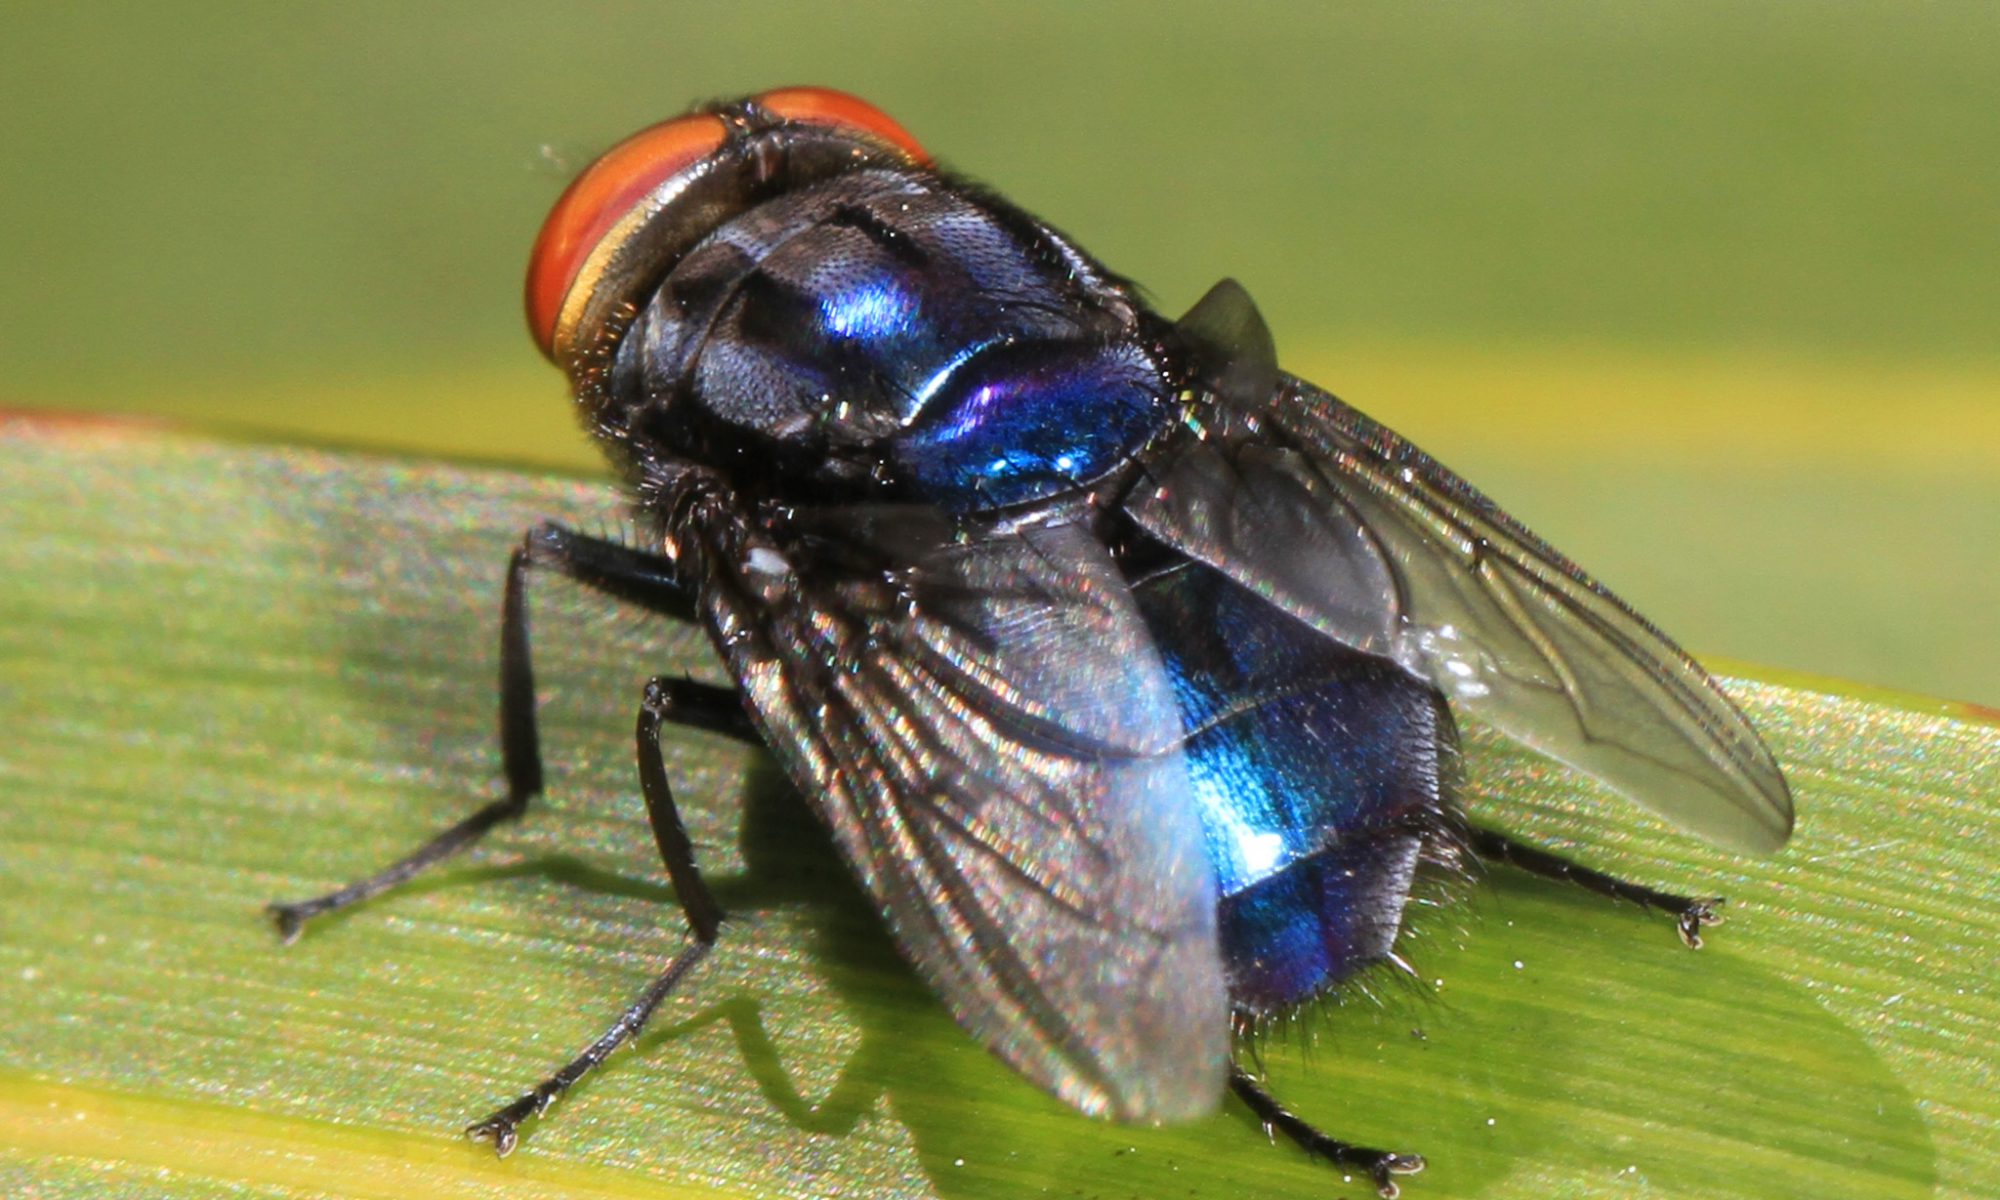 Close-up color photograph of a screwworm fly on a green leaf.